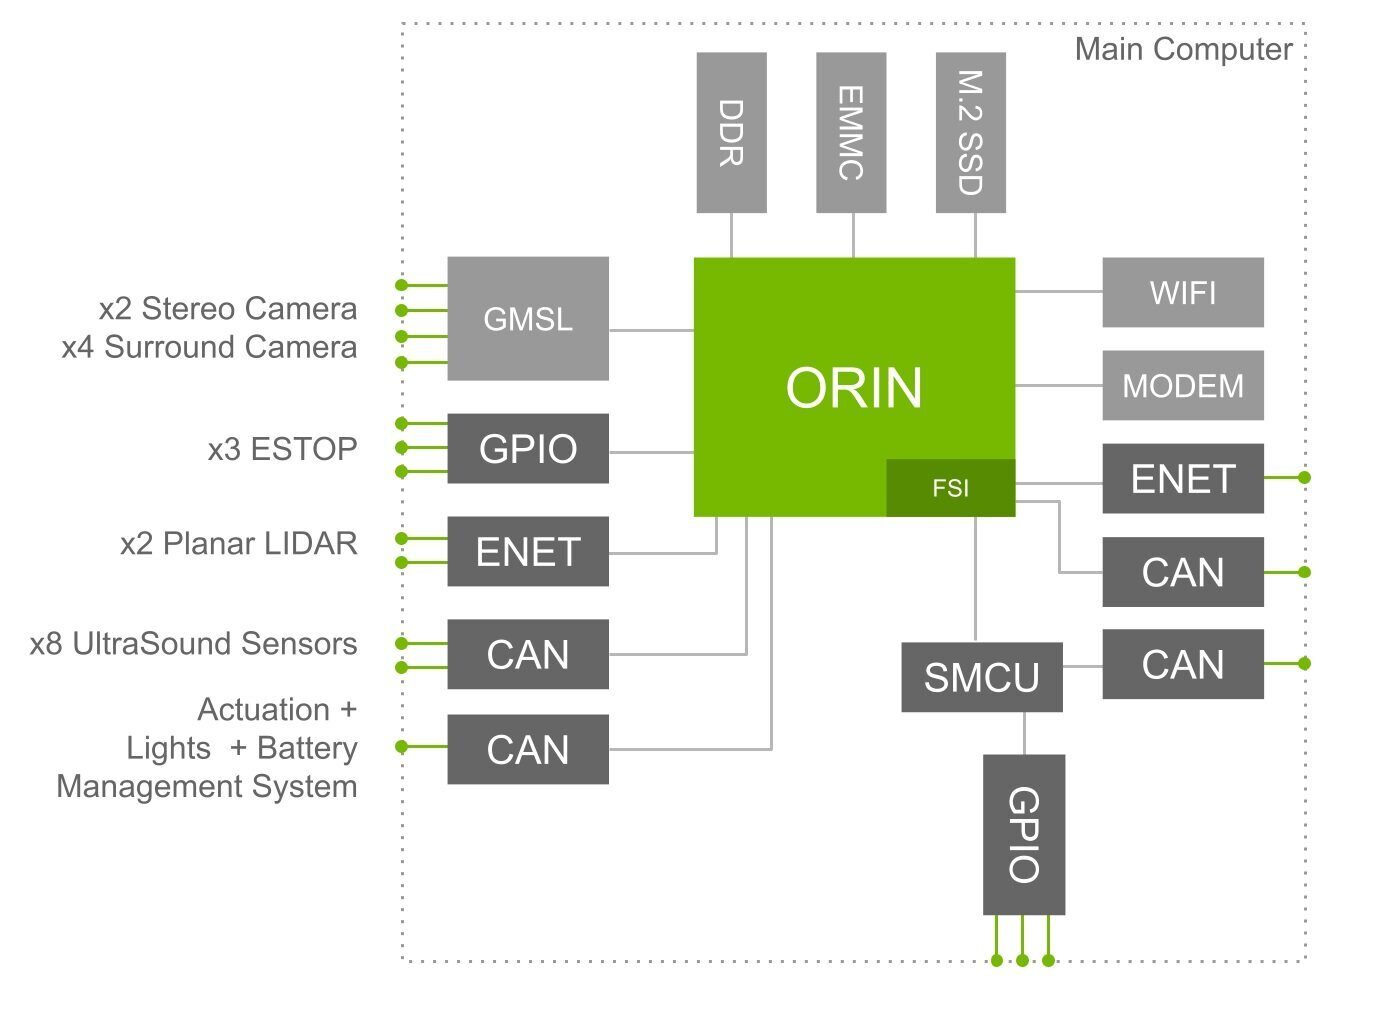 Schematic diagram of the ORIN AMR Main Computer architecture